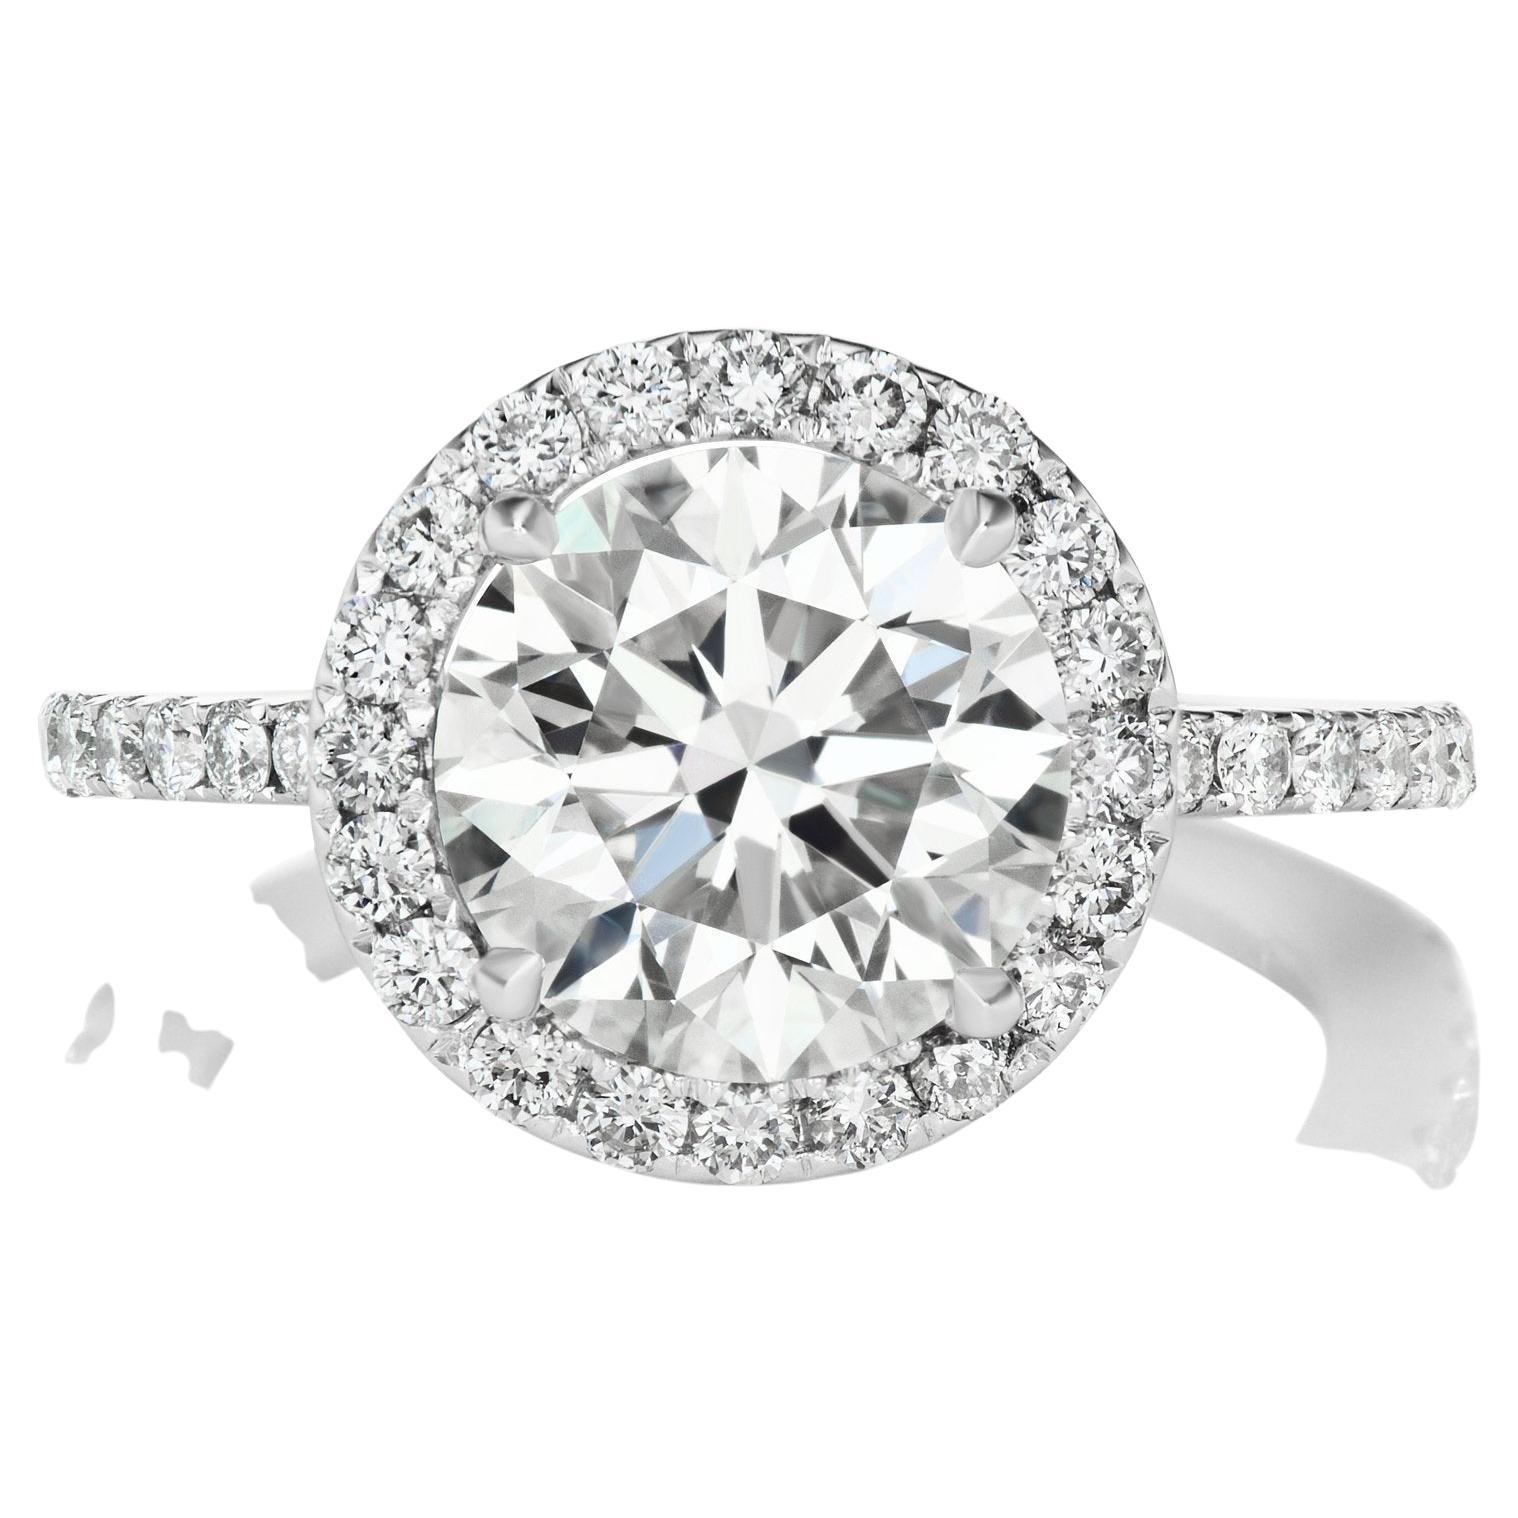 3 Carat Round Cut Diamond Engagement Ring EGL Certified I VS1 For Sale